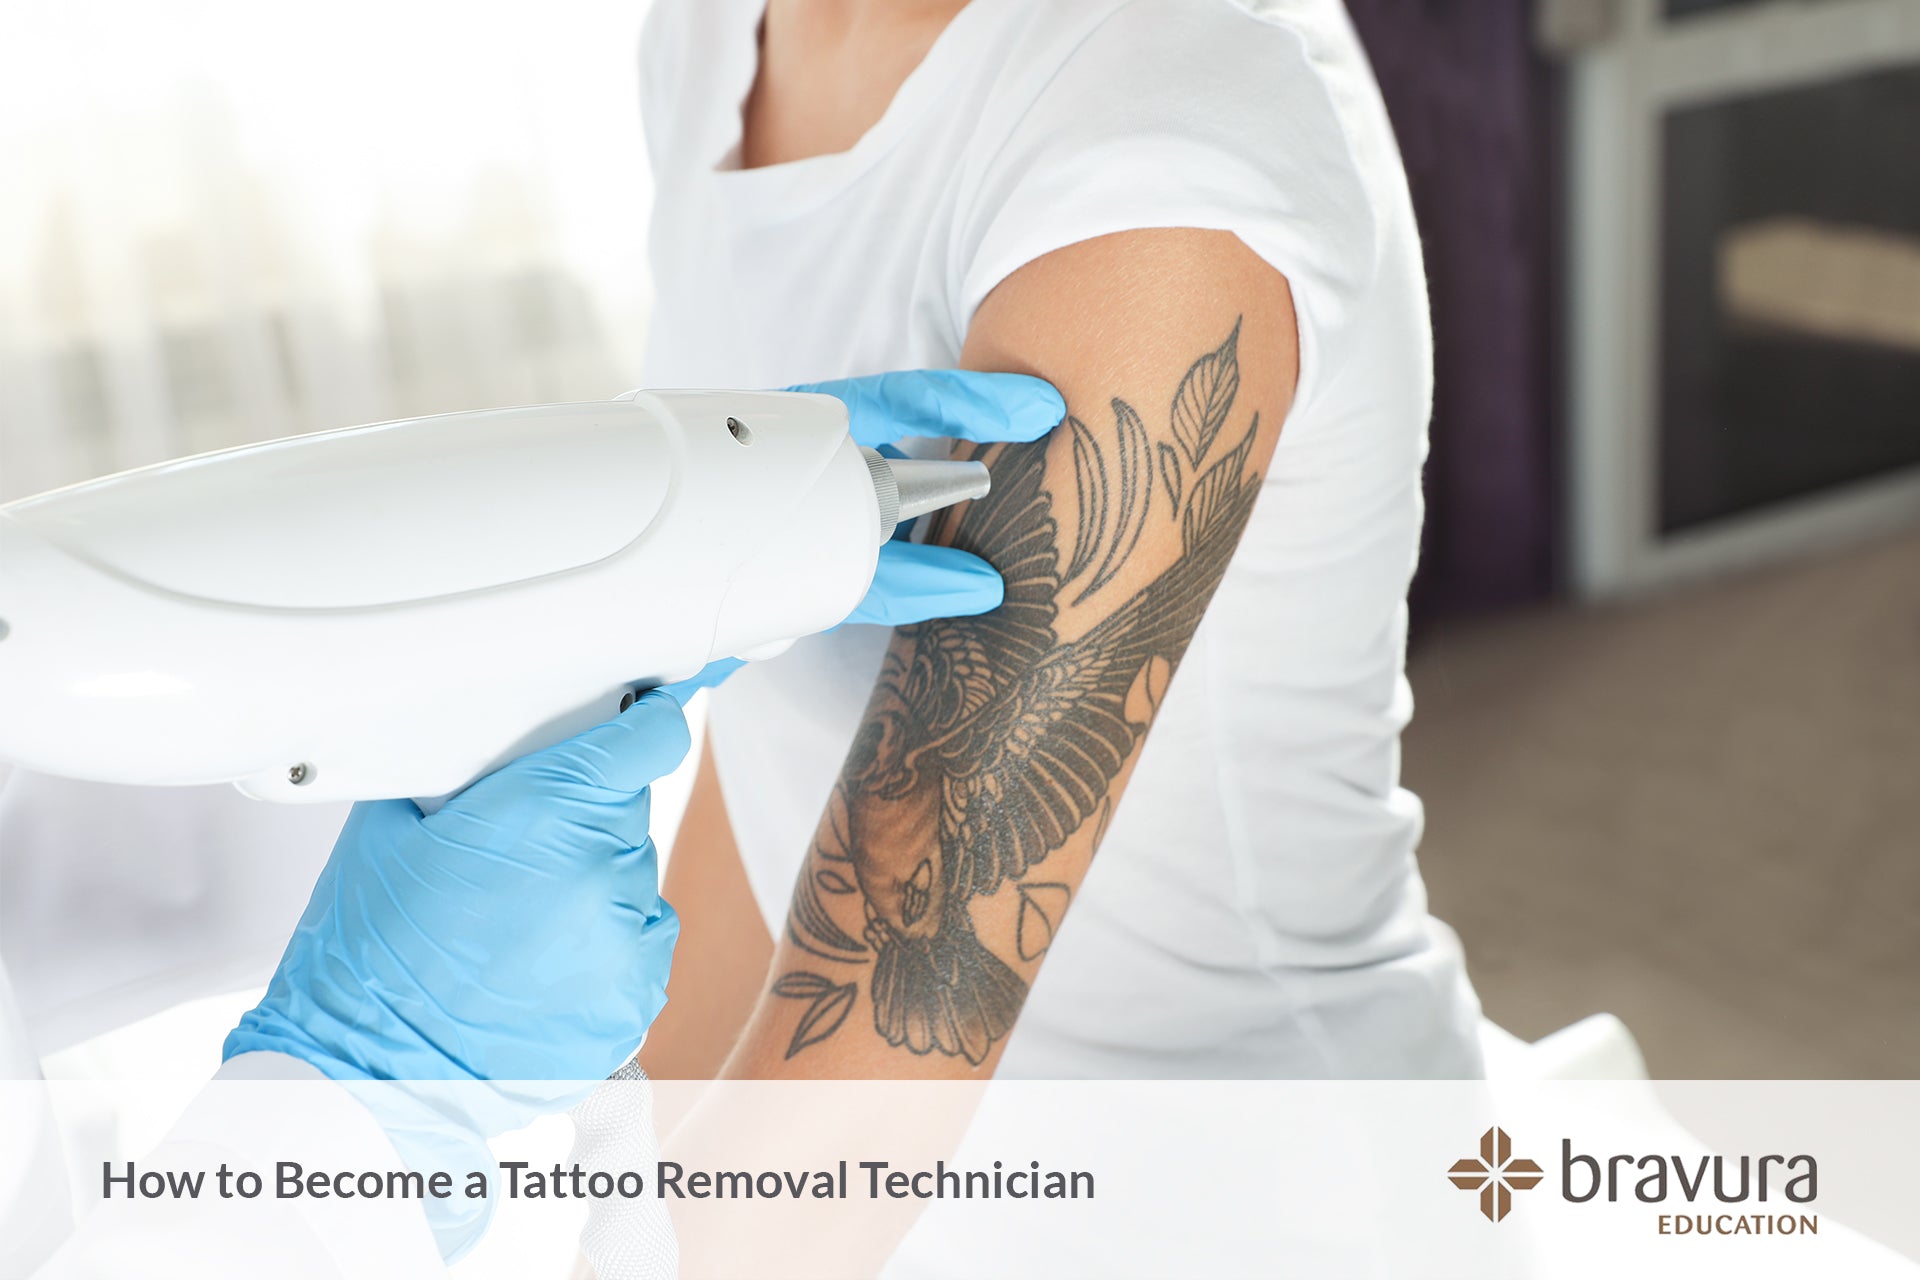 How to Become a Tattoo Removal Technician